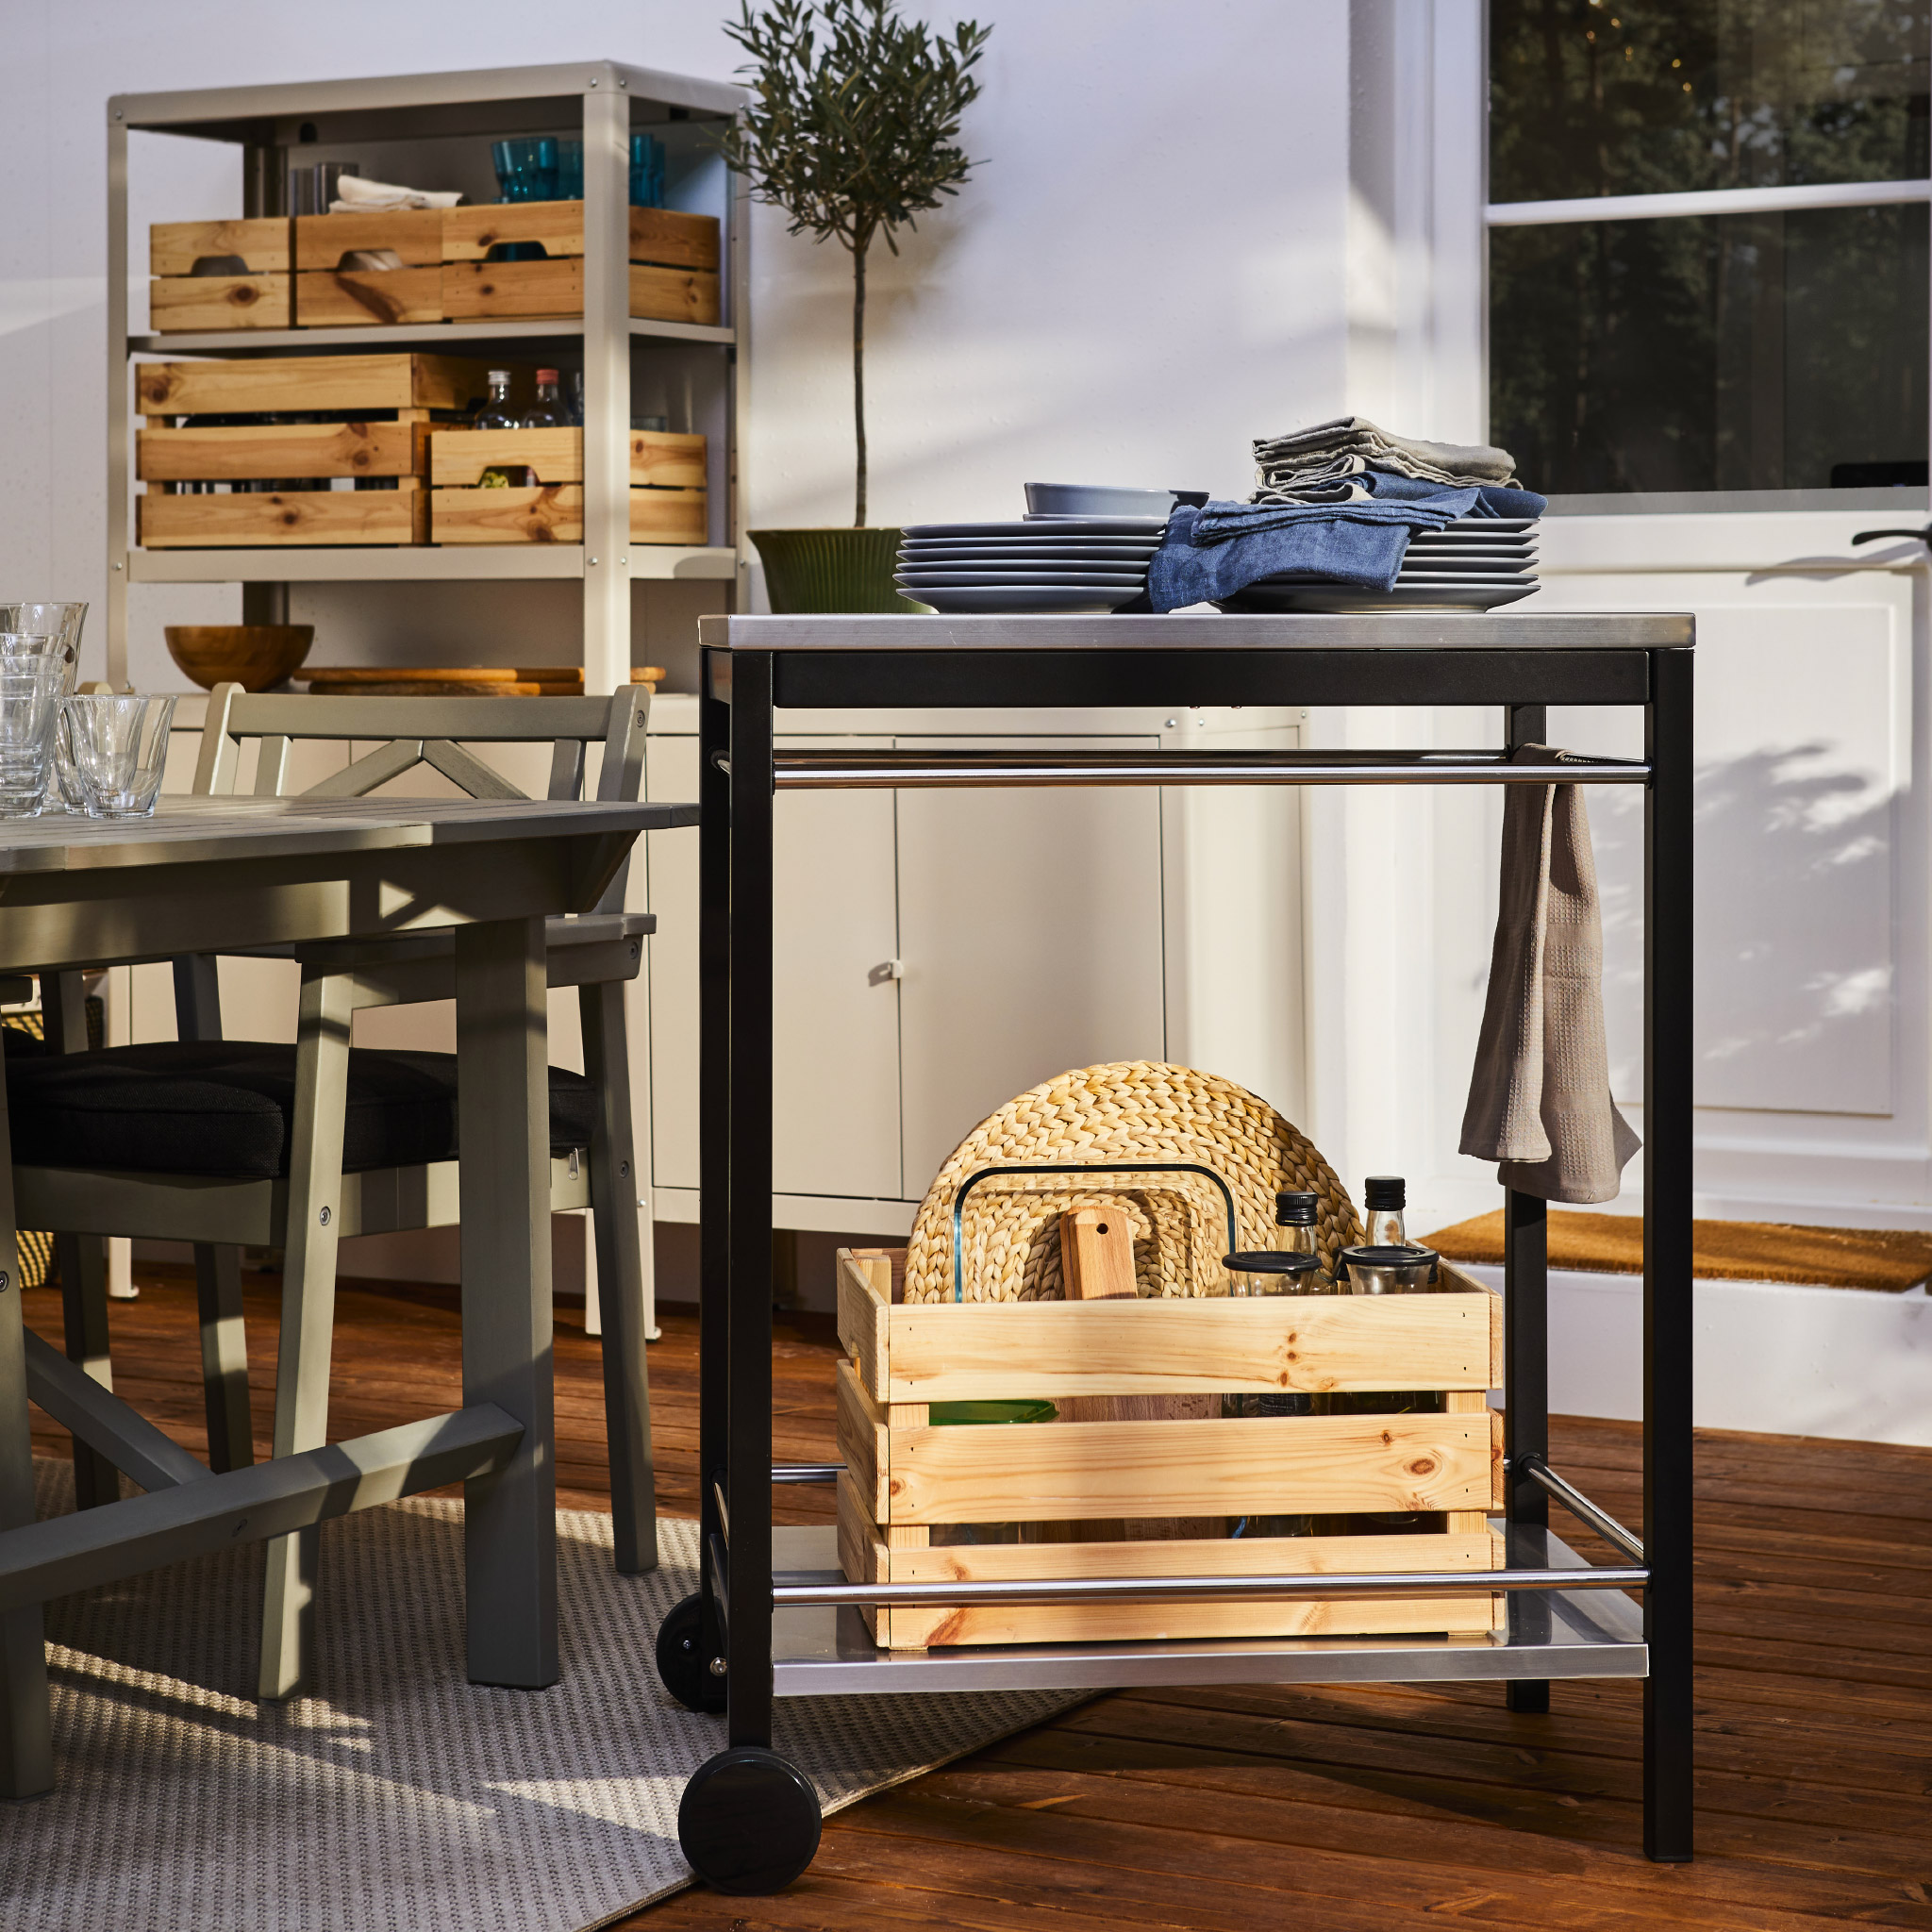 A trolley on castors in black/stainless steel holds dinnerware, towels and more, and it’s standing by a dining table.